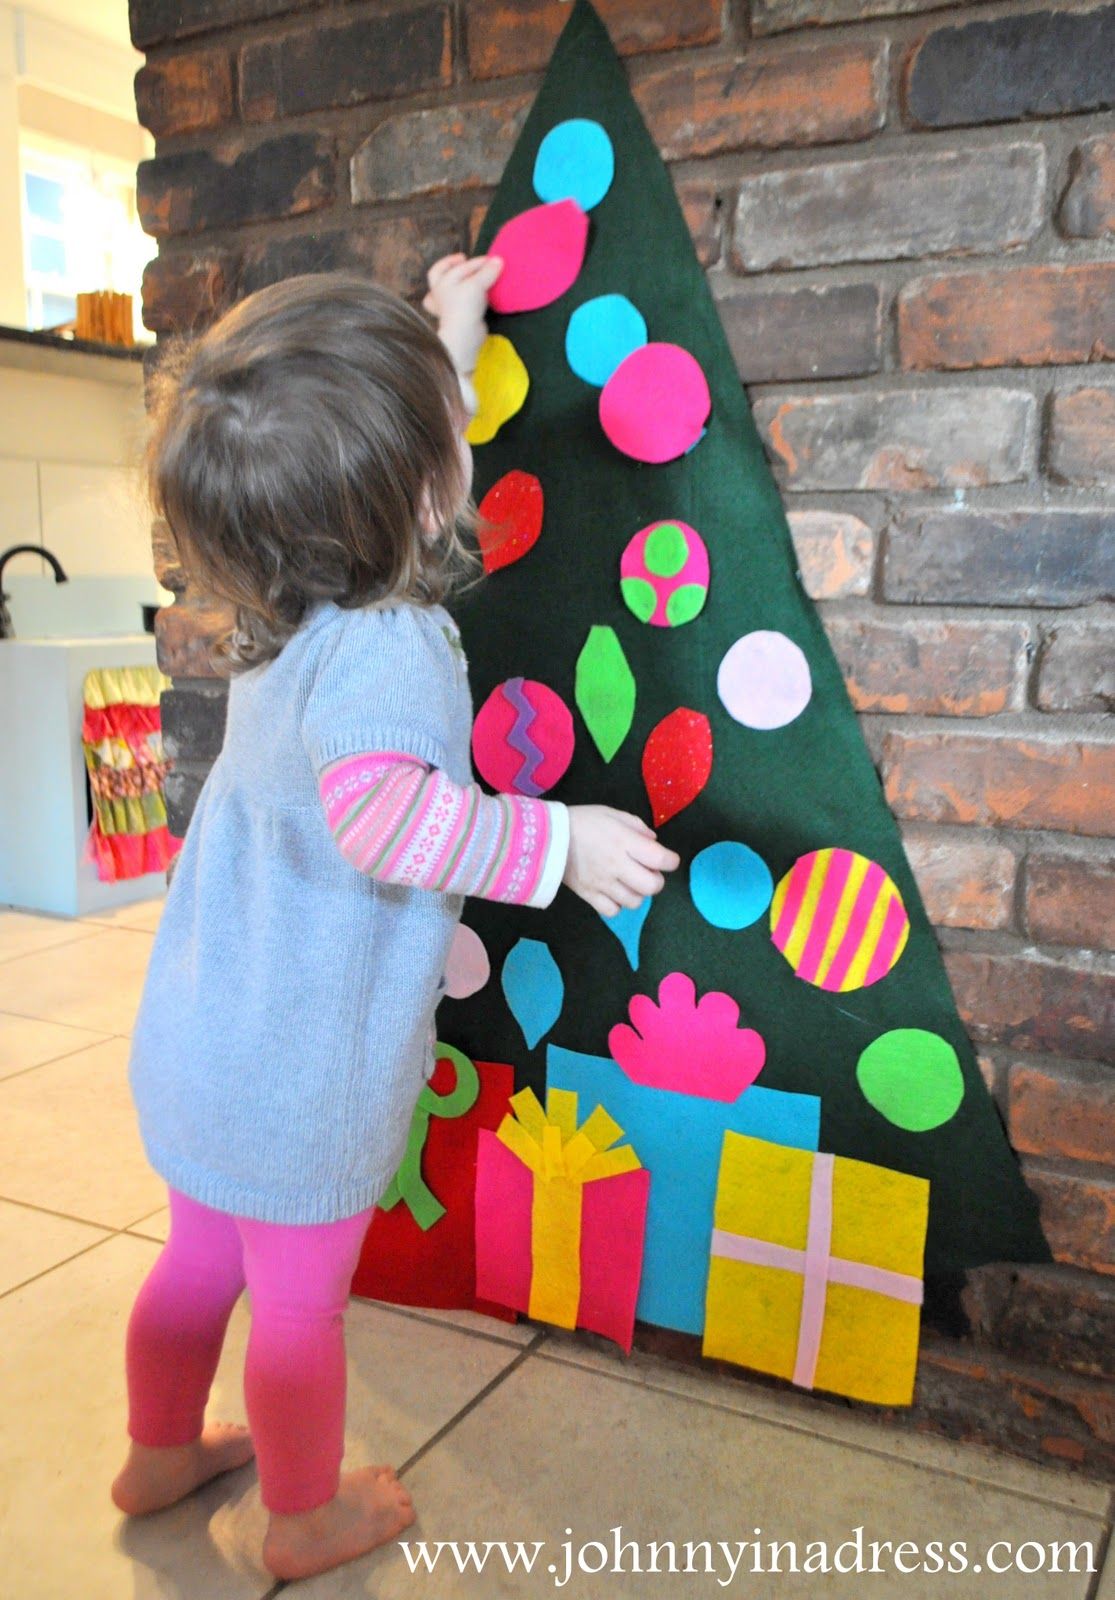 Ucreate with Kids: Christmas Tree Craft: Felt Christmas Tree…great for pre